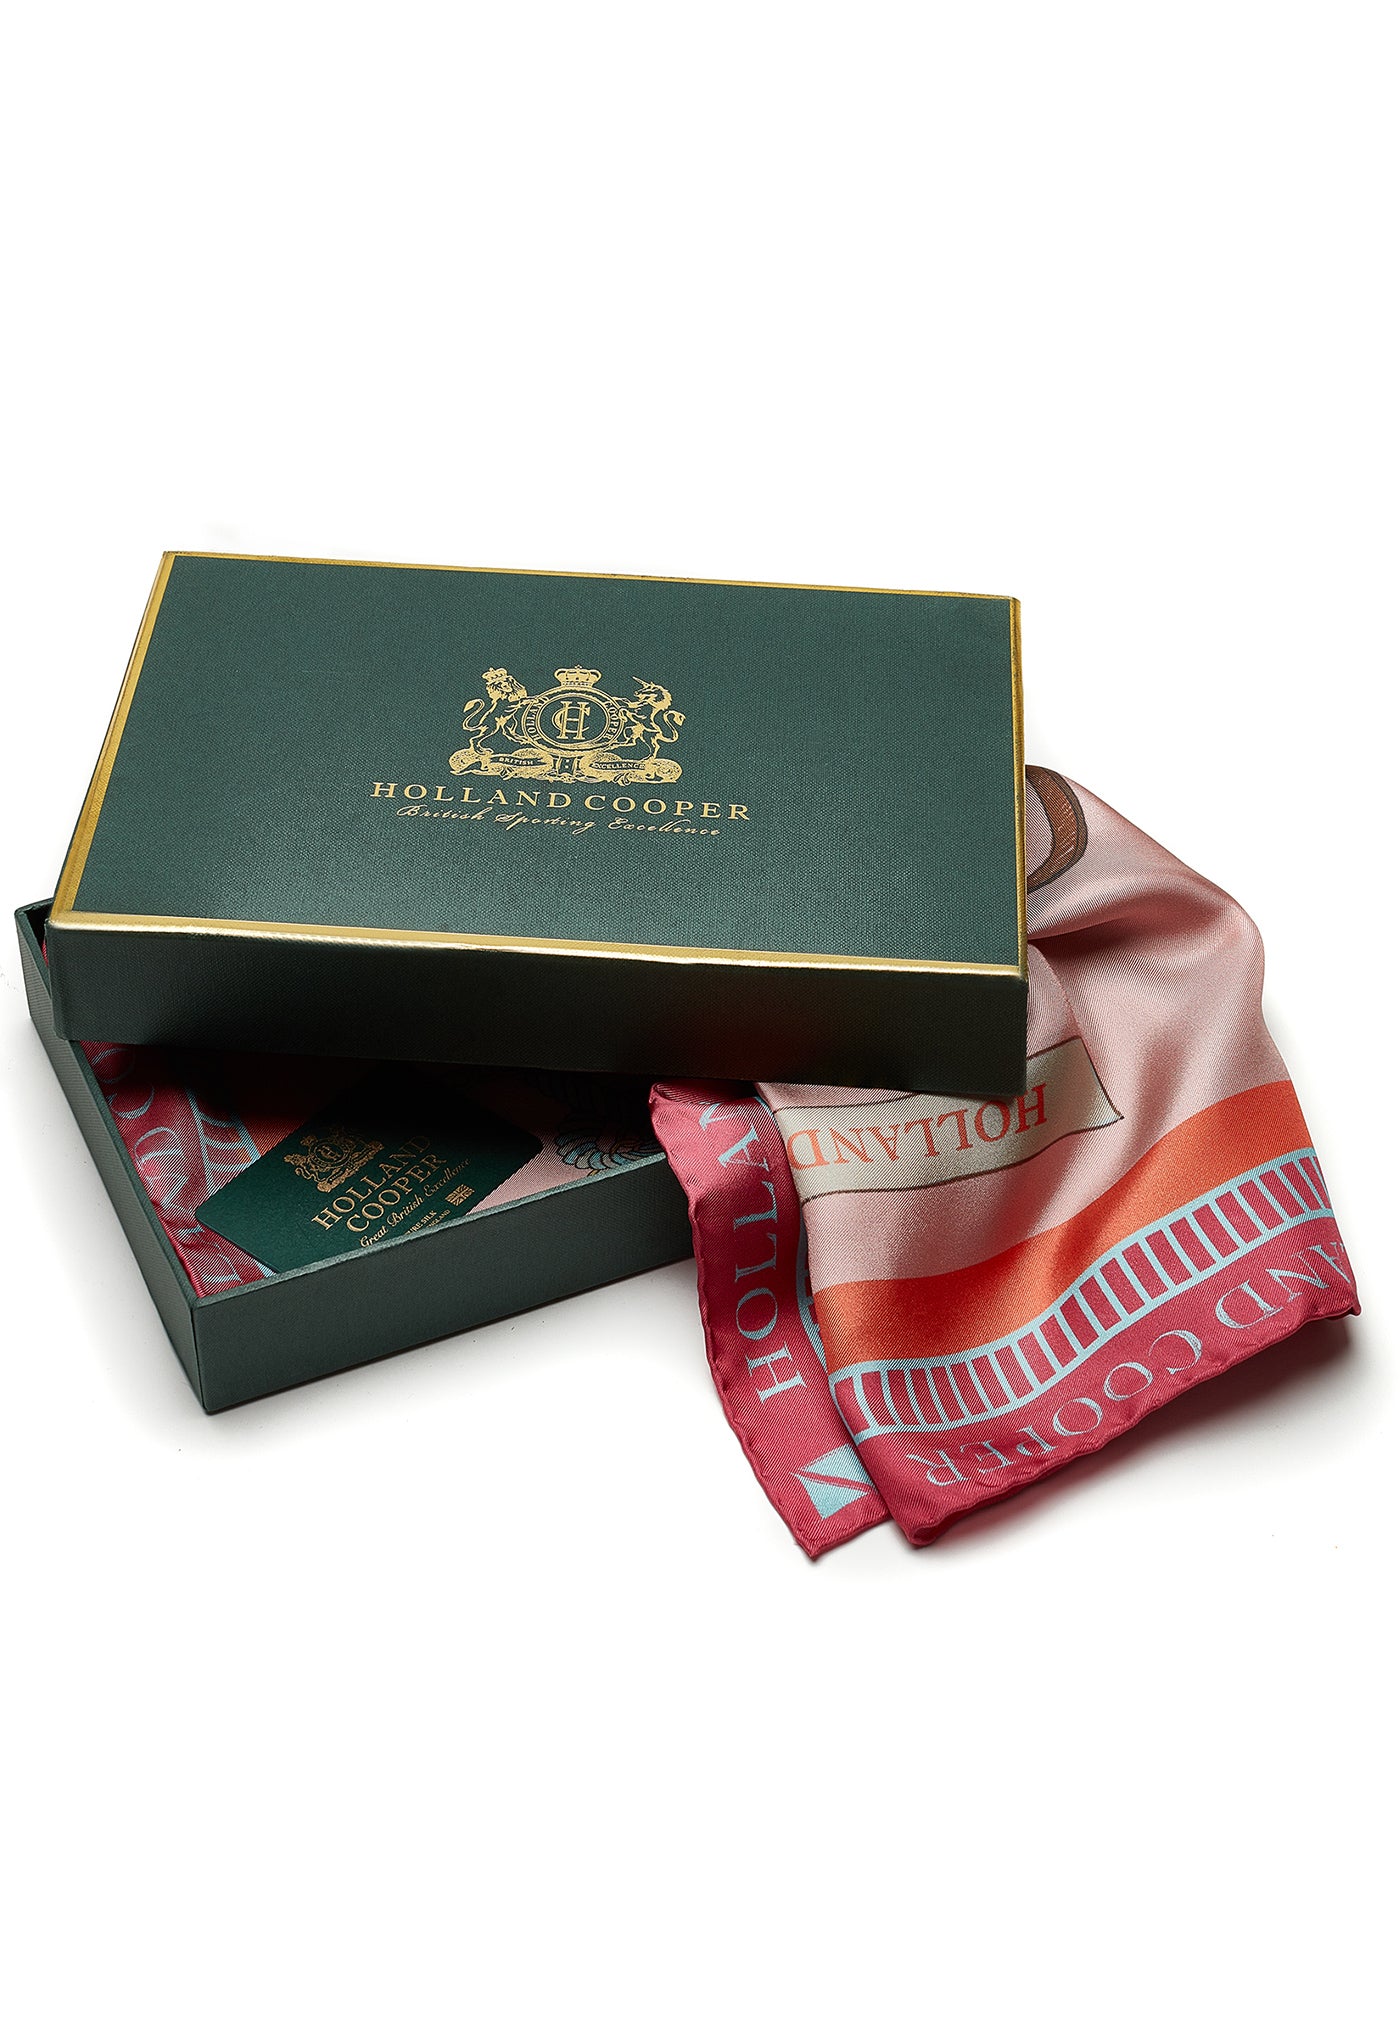 Regal Horse Silk Scarf - Coral sold by Angel Divine